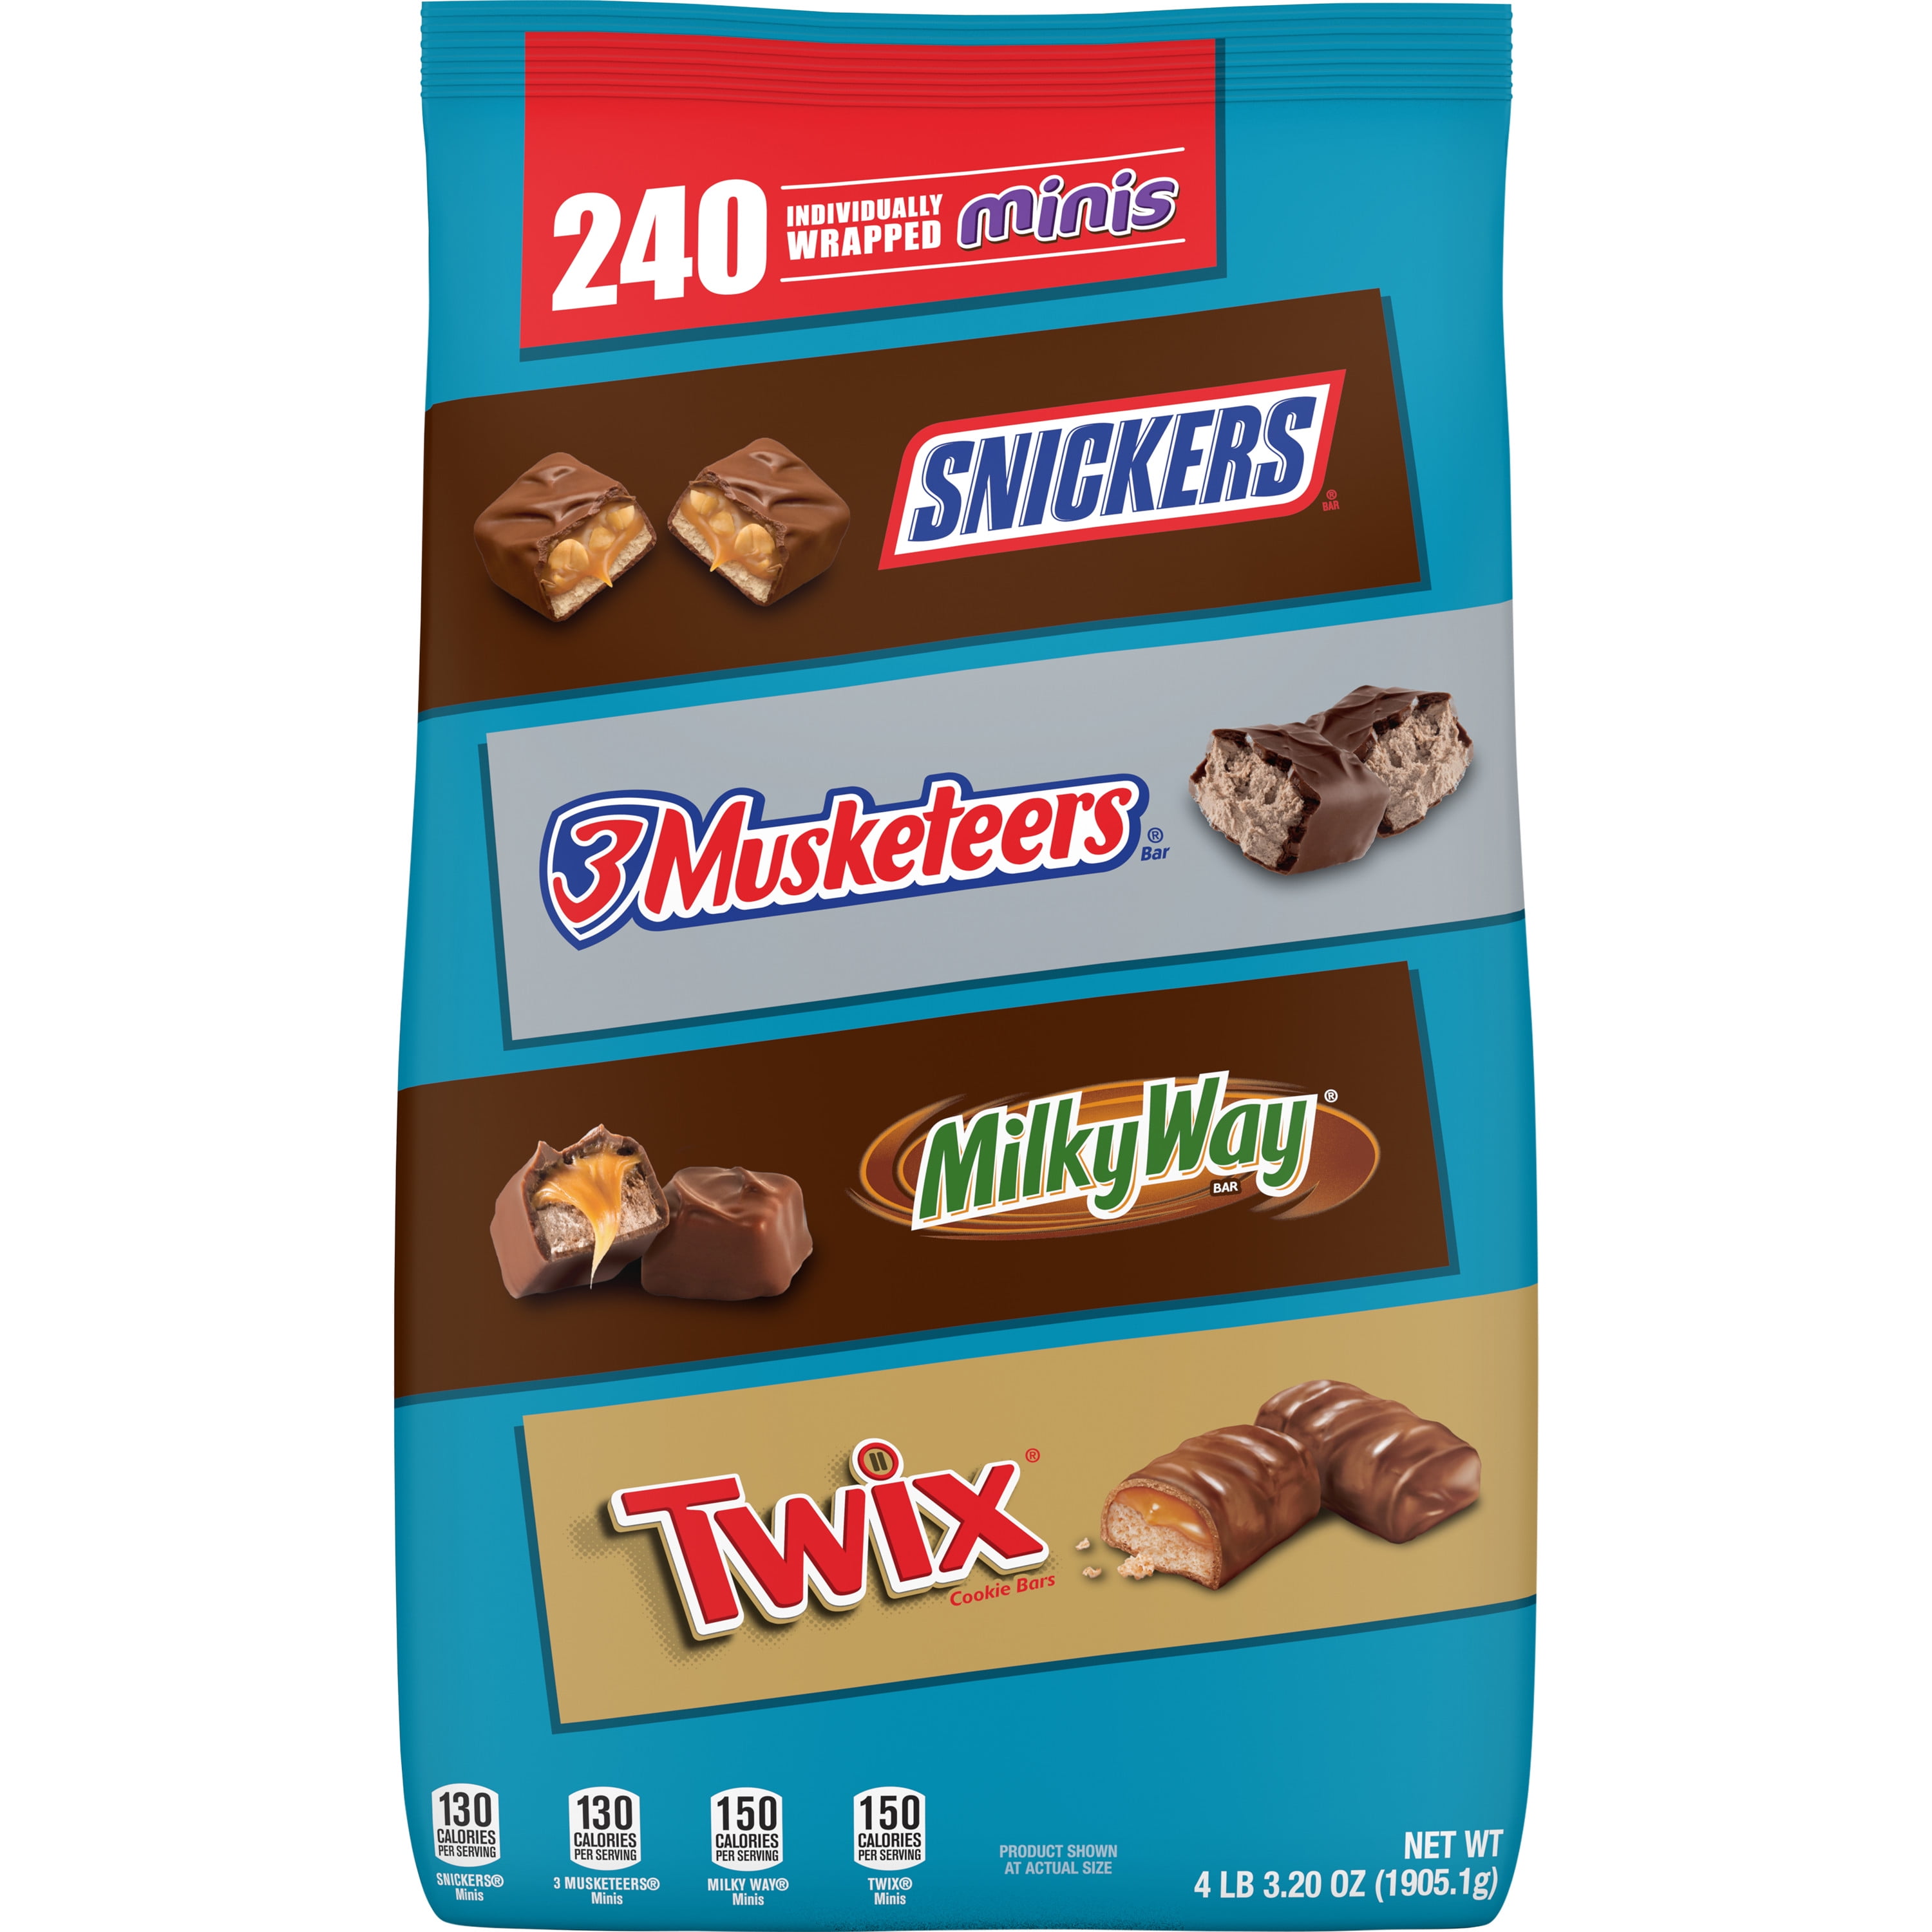 Snickers, Twix, Milky Way, 3 Musketeers Minis, Chocolate Candy, Super Bowl Party Size, 240 pieces